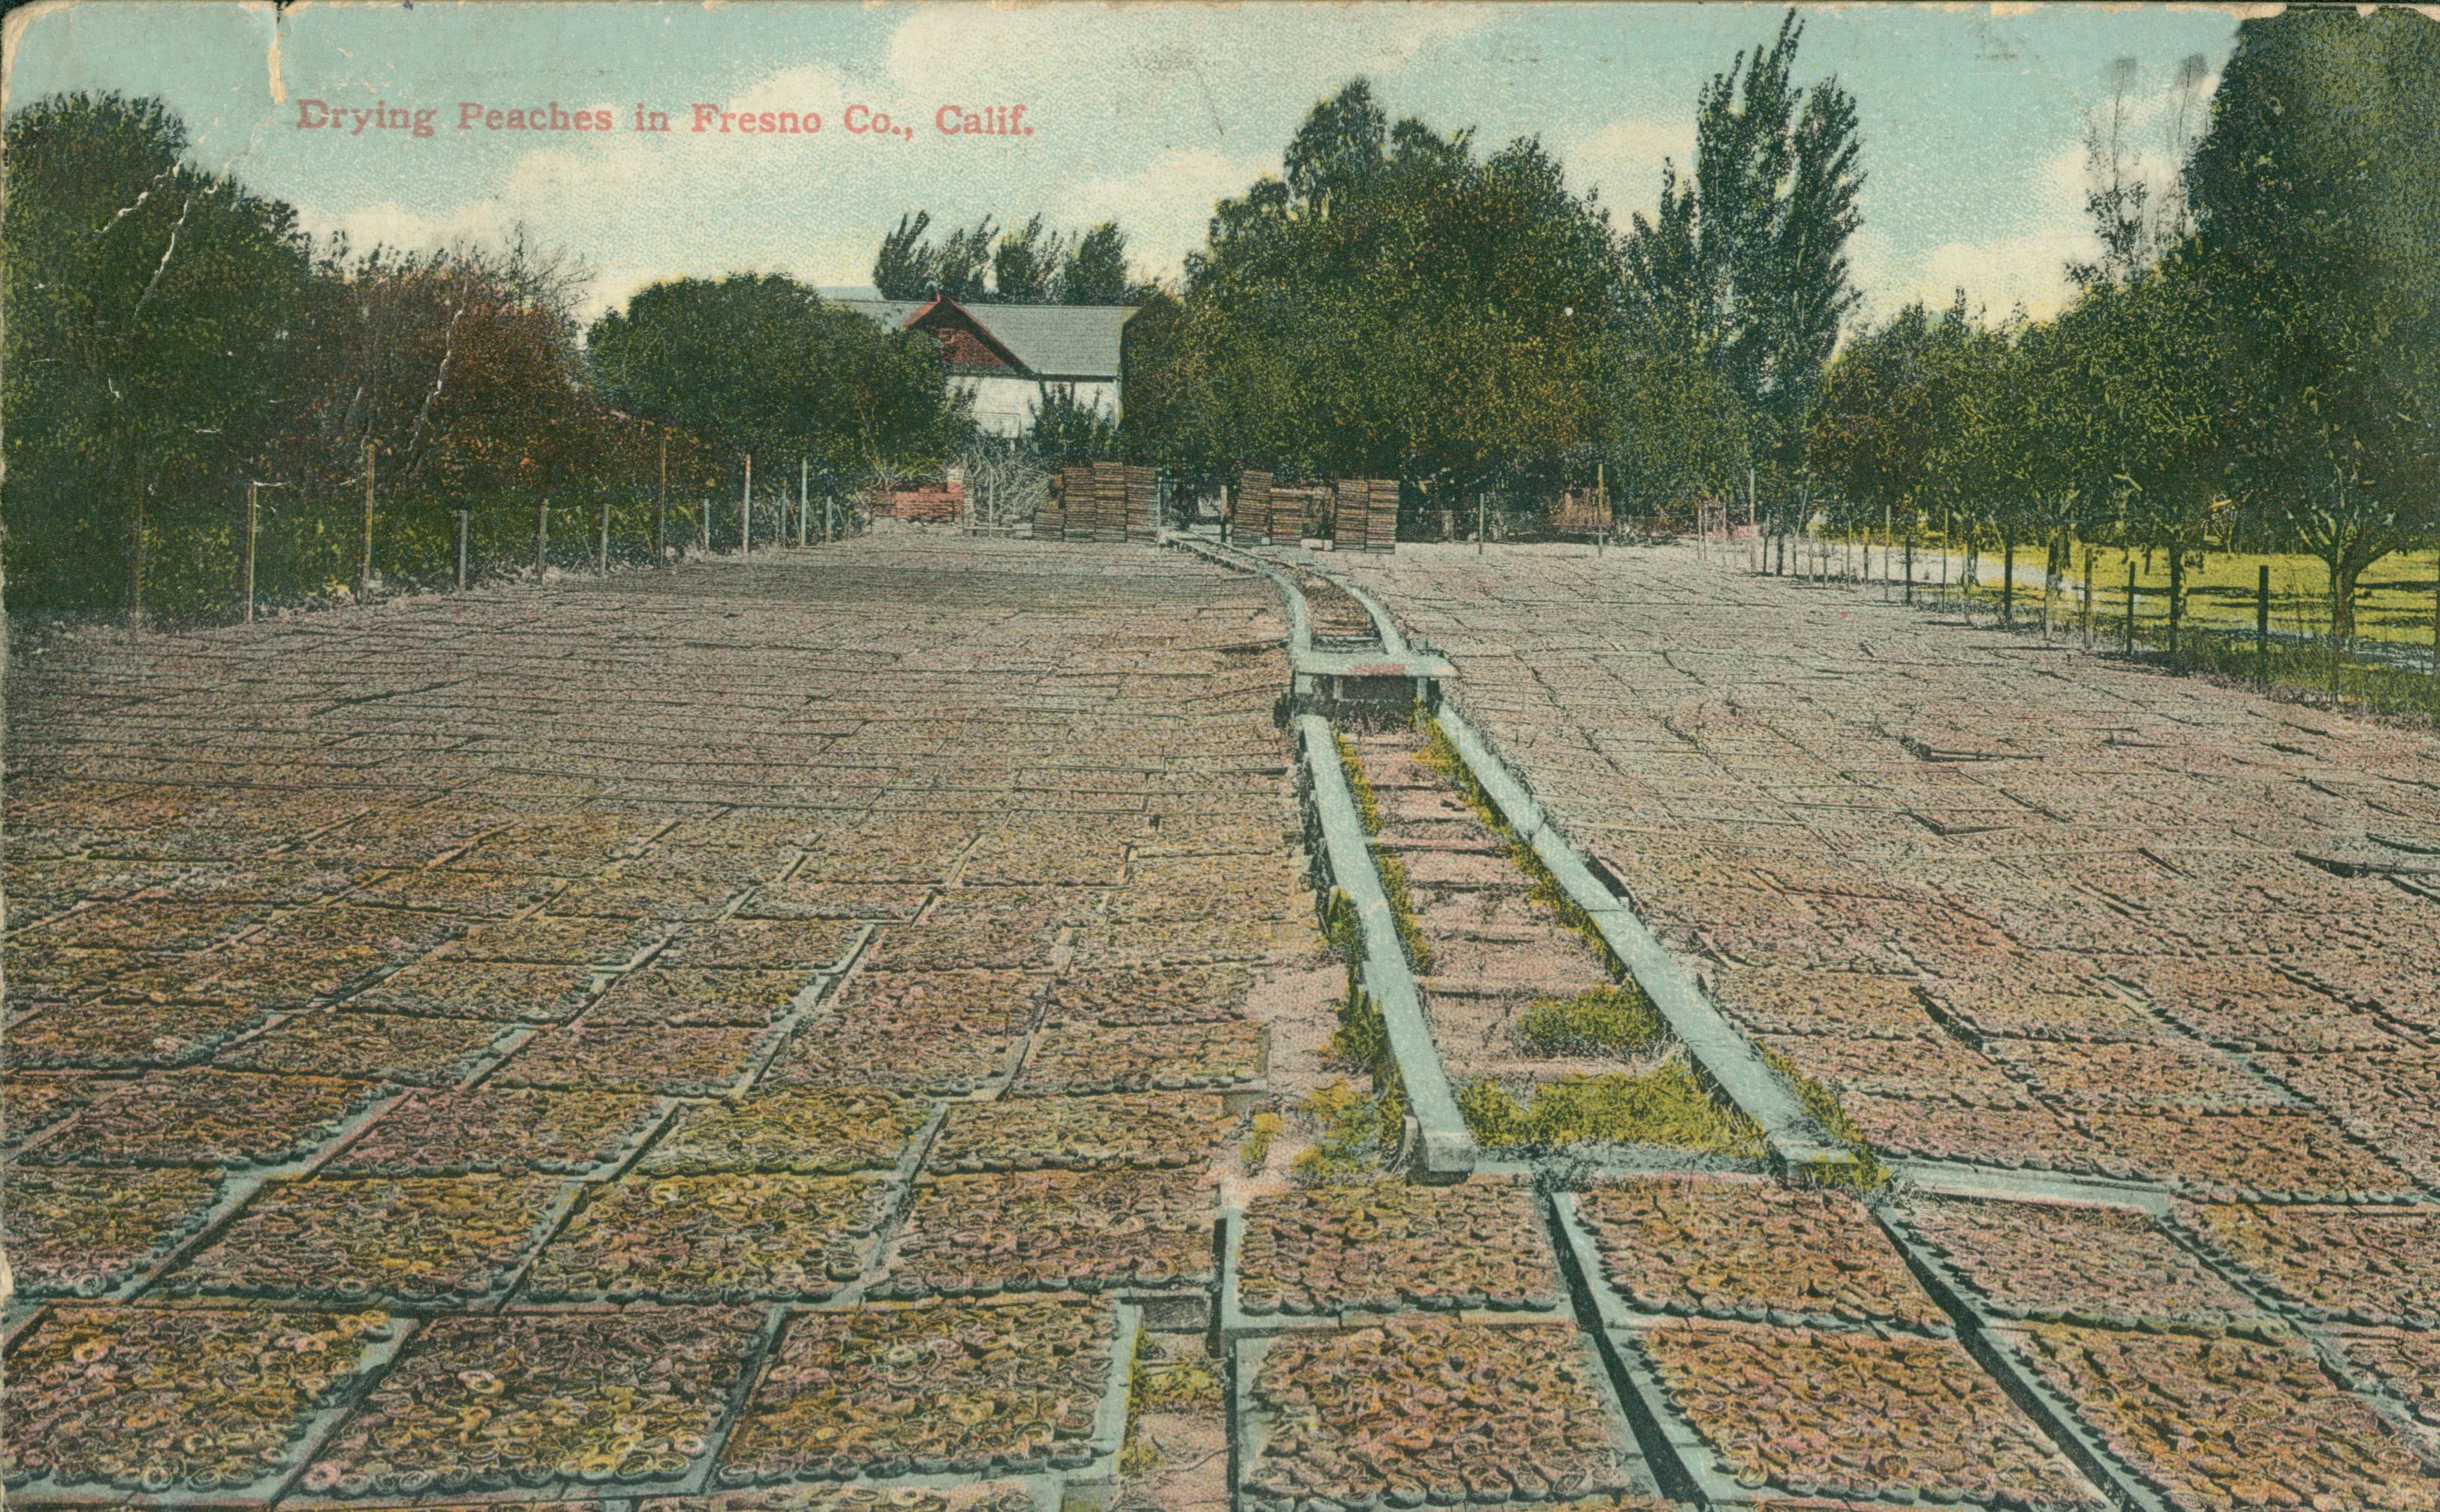 Shows a field full of drying peaches